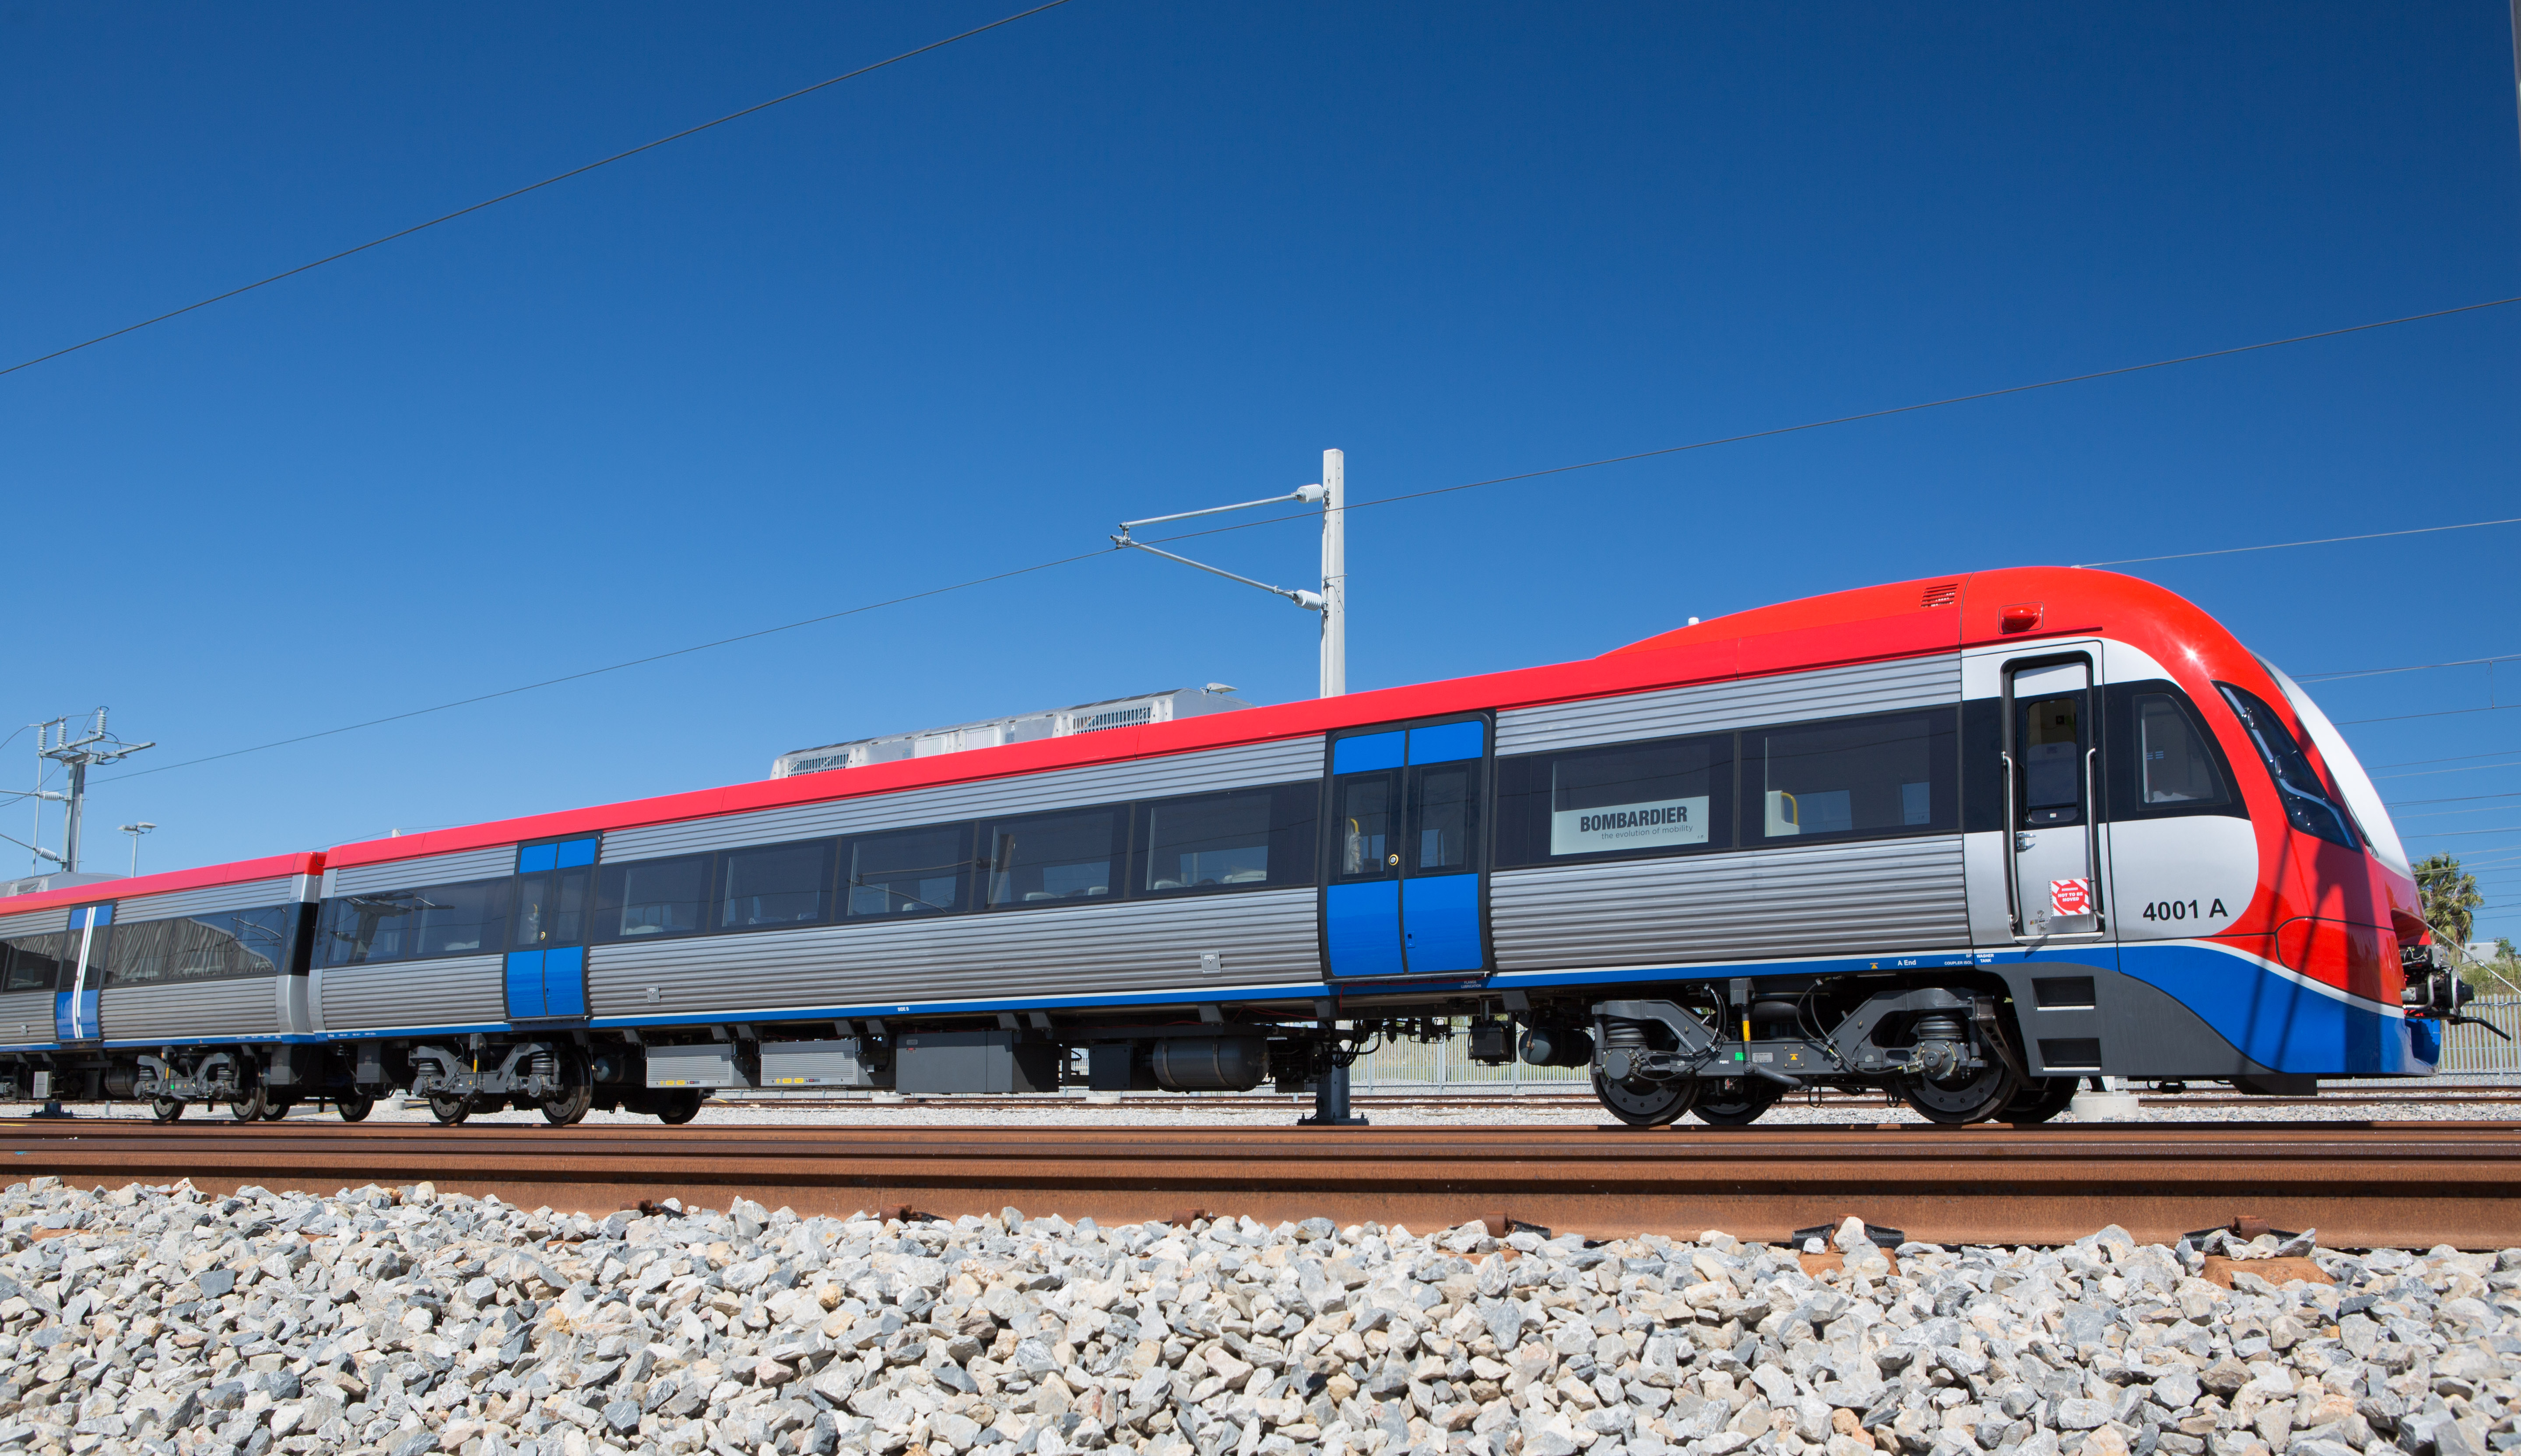 Bombardier wins order to supply 12 commuter trains for Adelaide, Australia3